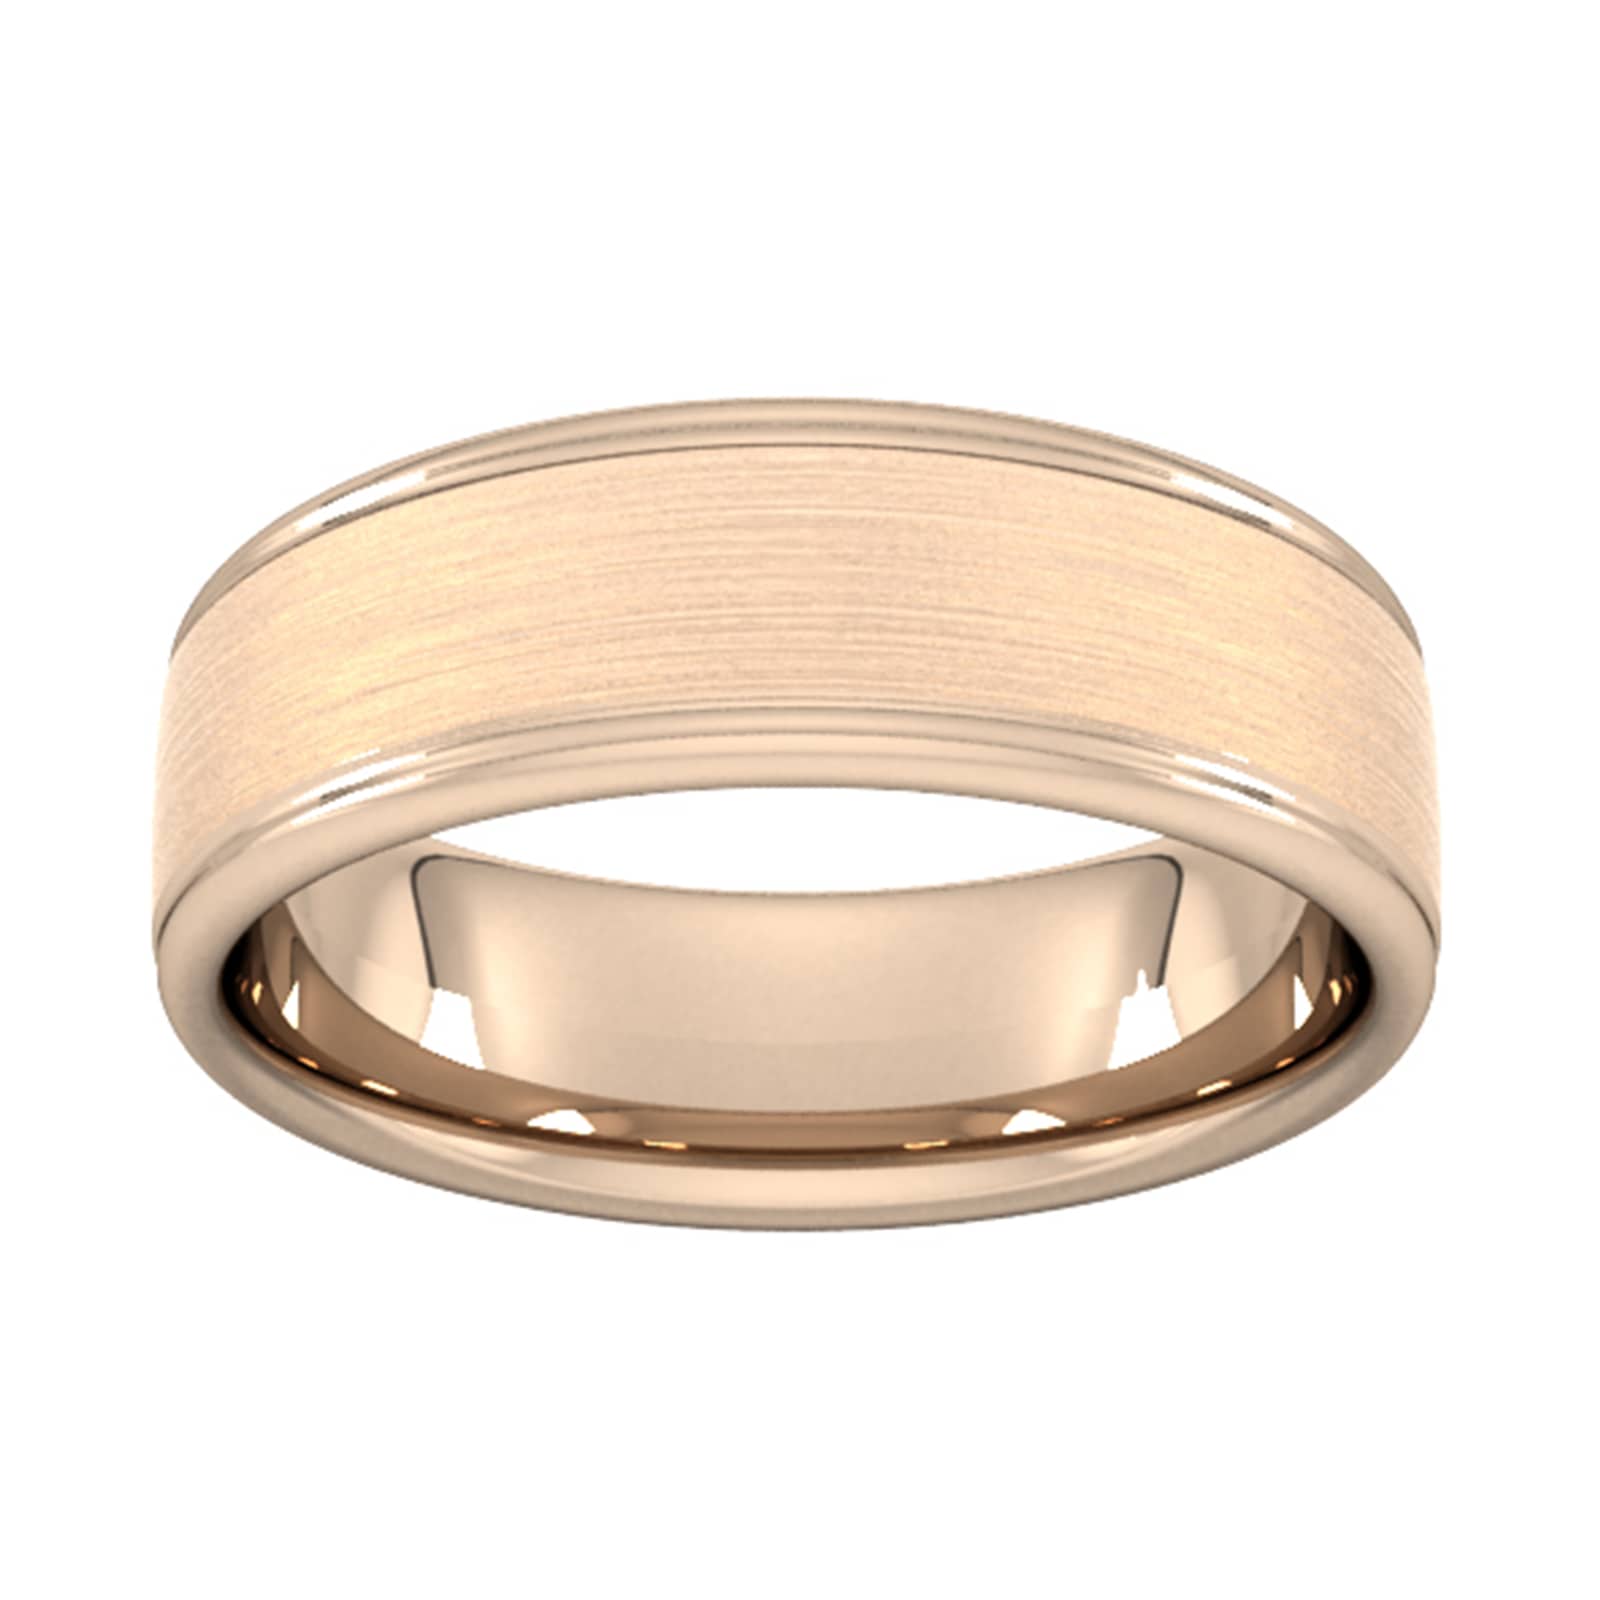 7mm D Shape Heavy Matt Centre With Grooves Wedding Ring In 9 Carat Rose Gold - Ring Size H